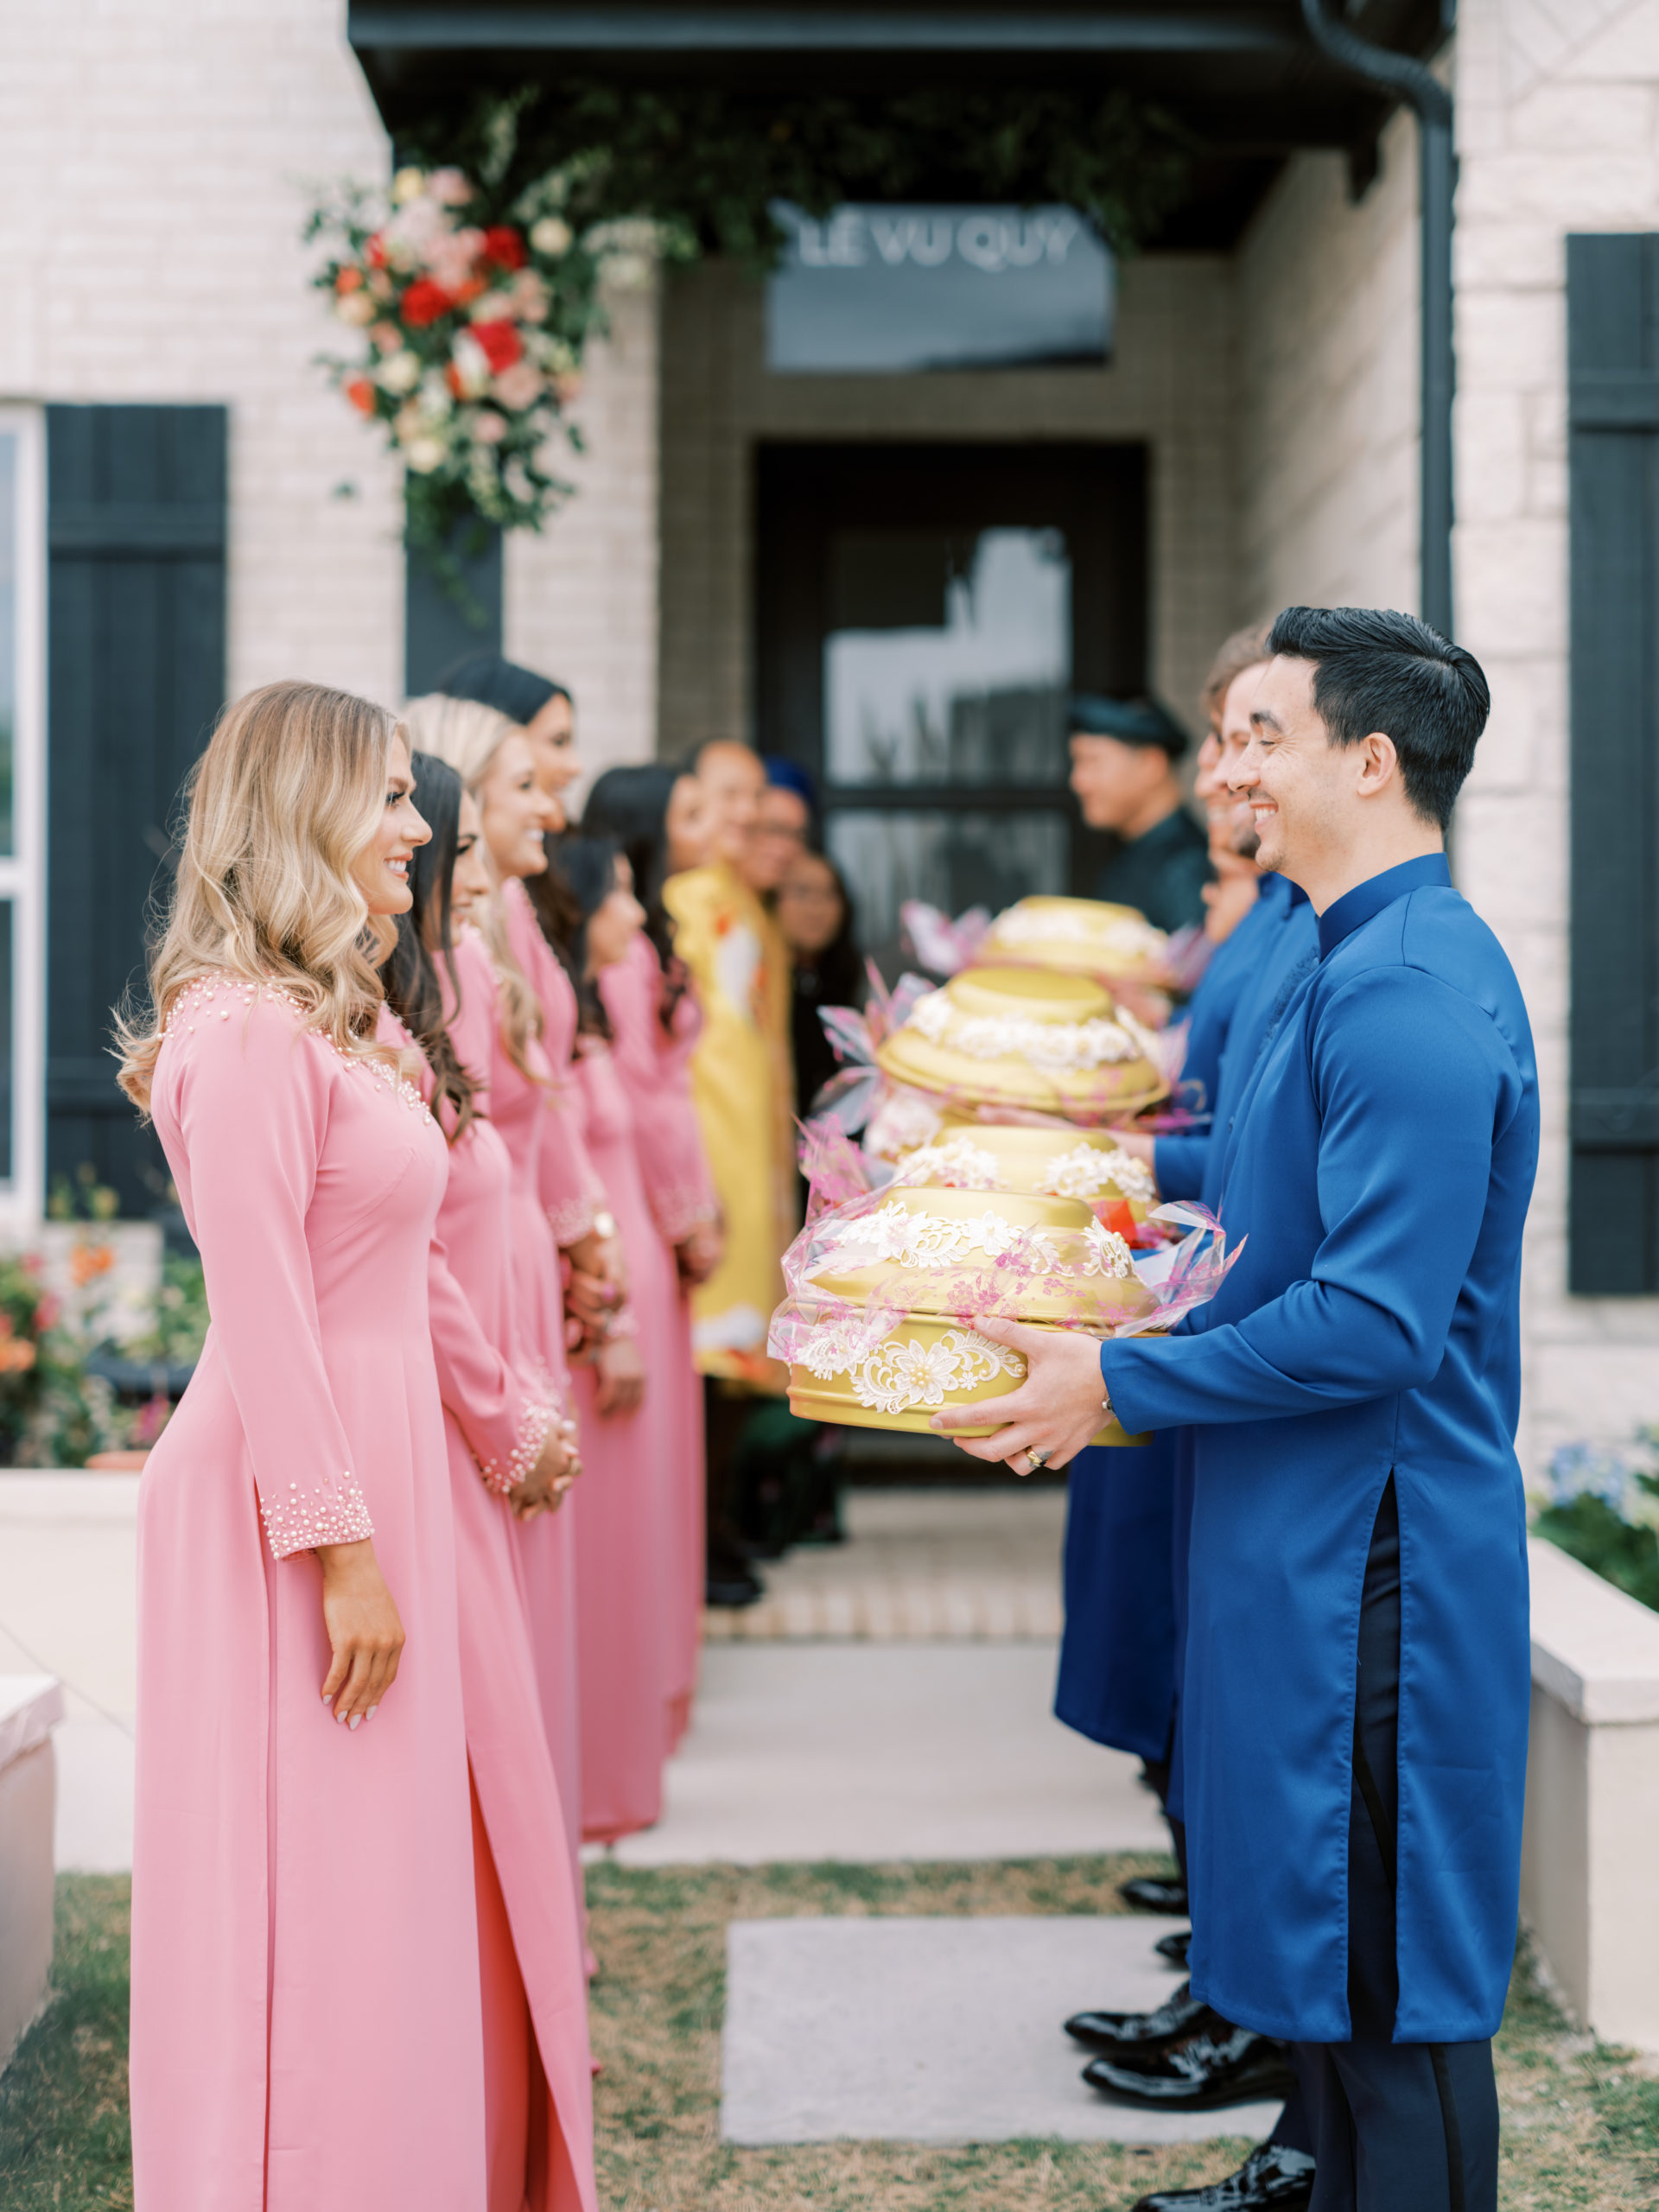 Sarah Rose Summers (birdesmaid) and Sebastian Ornstein (groomsman) exchange gifts on behalf of the groom and bride's family during a Vietnamese wedding ceremony wearing ao dai.